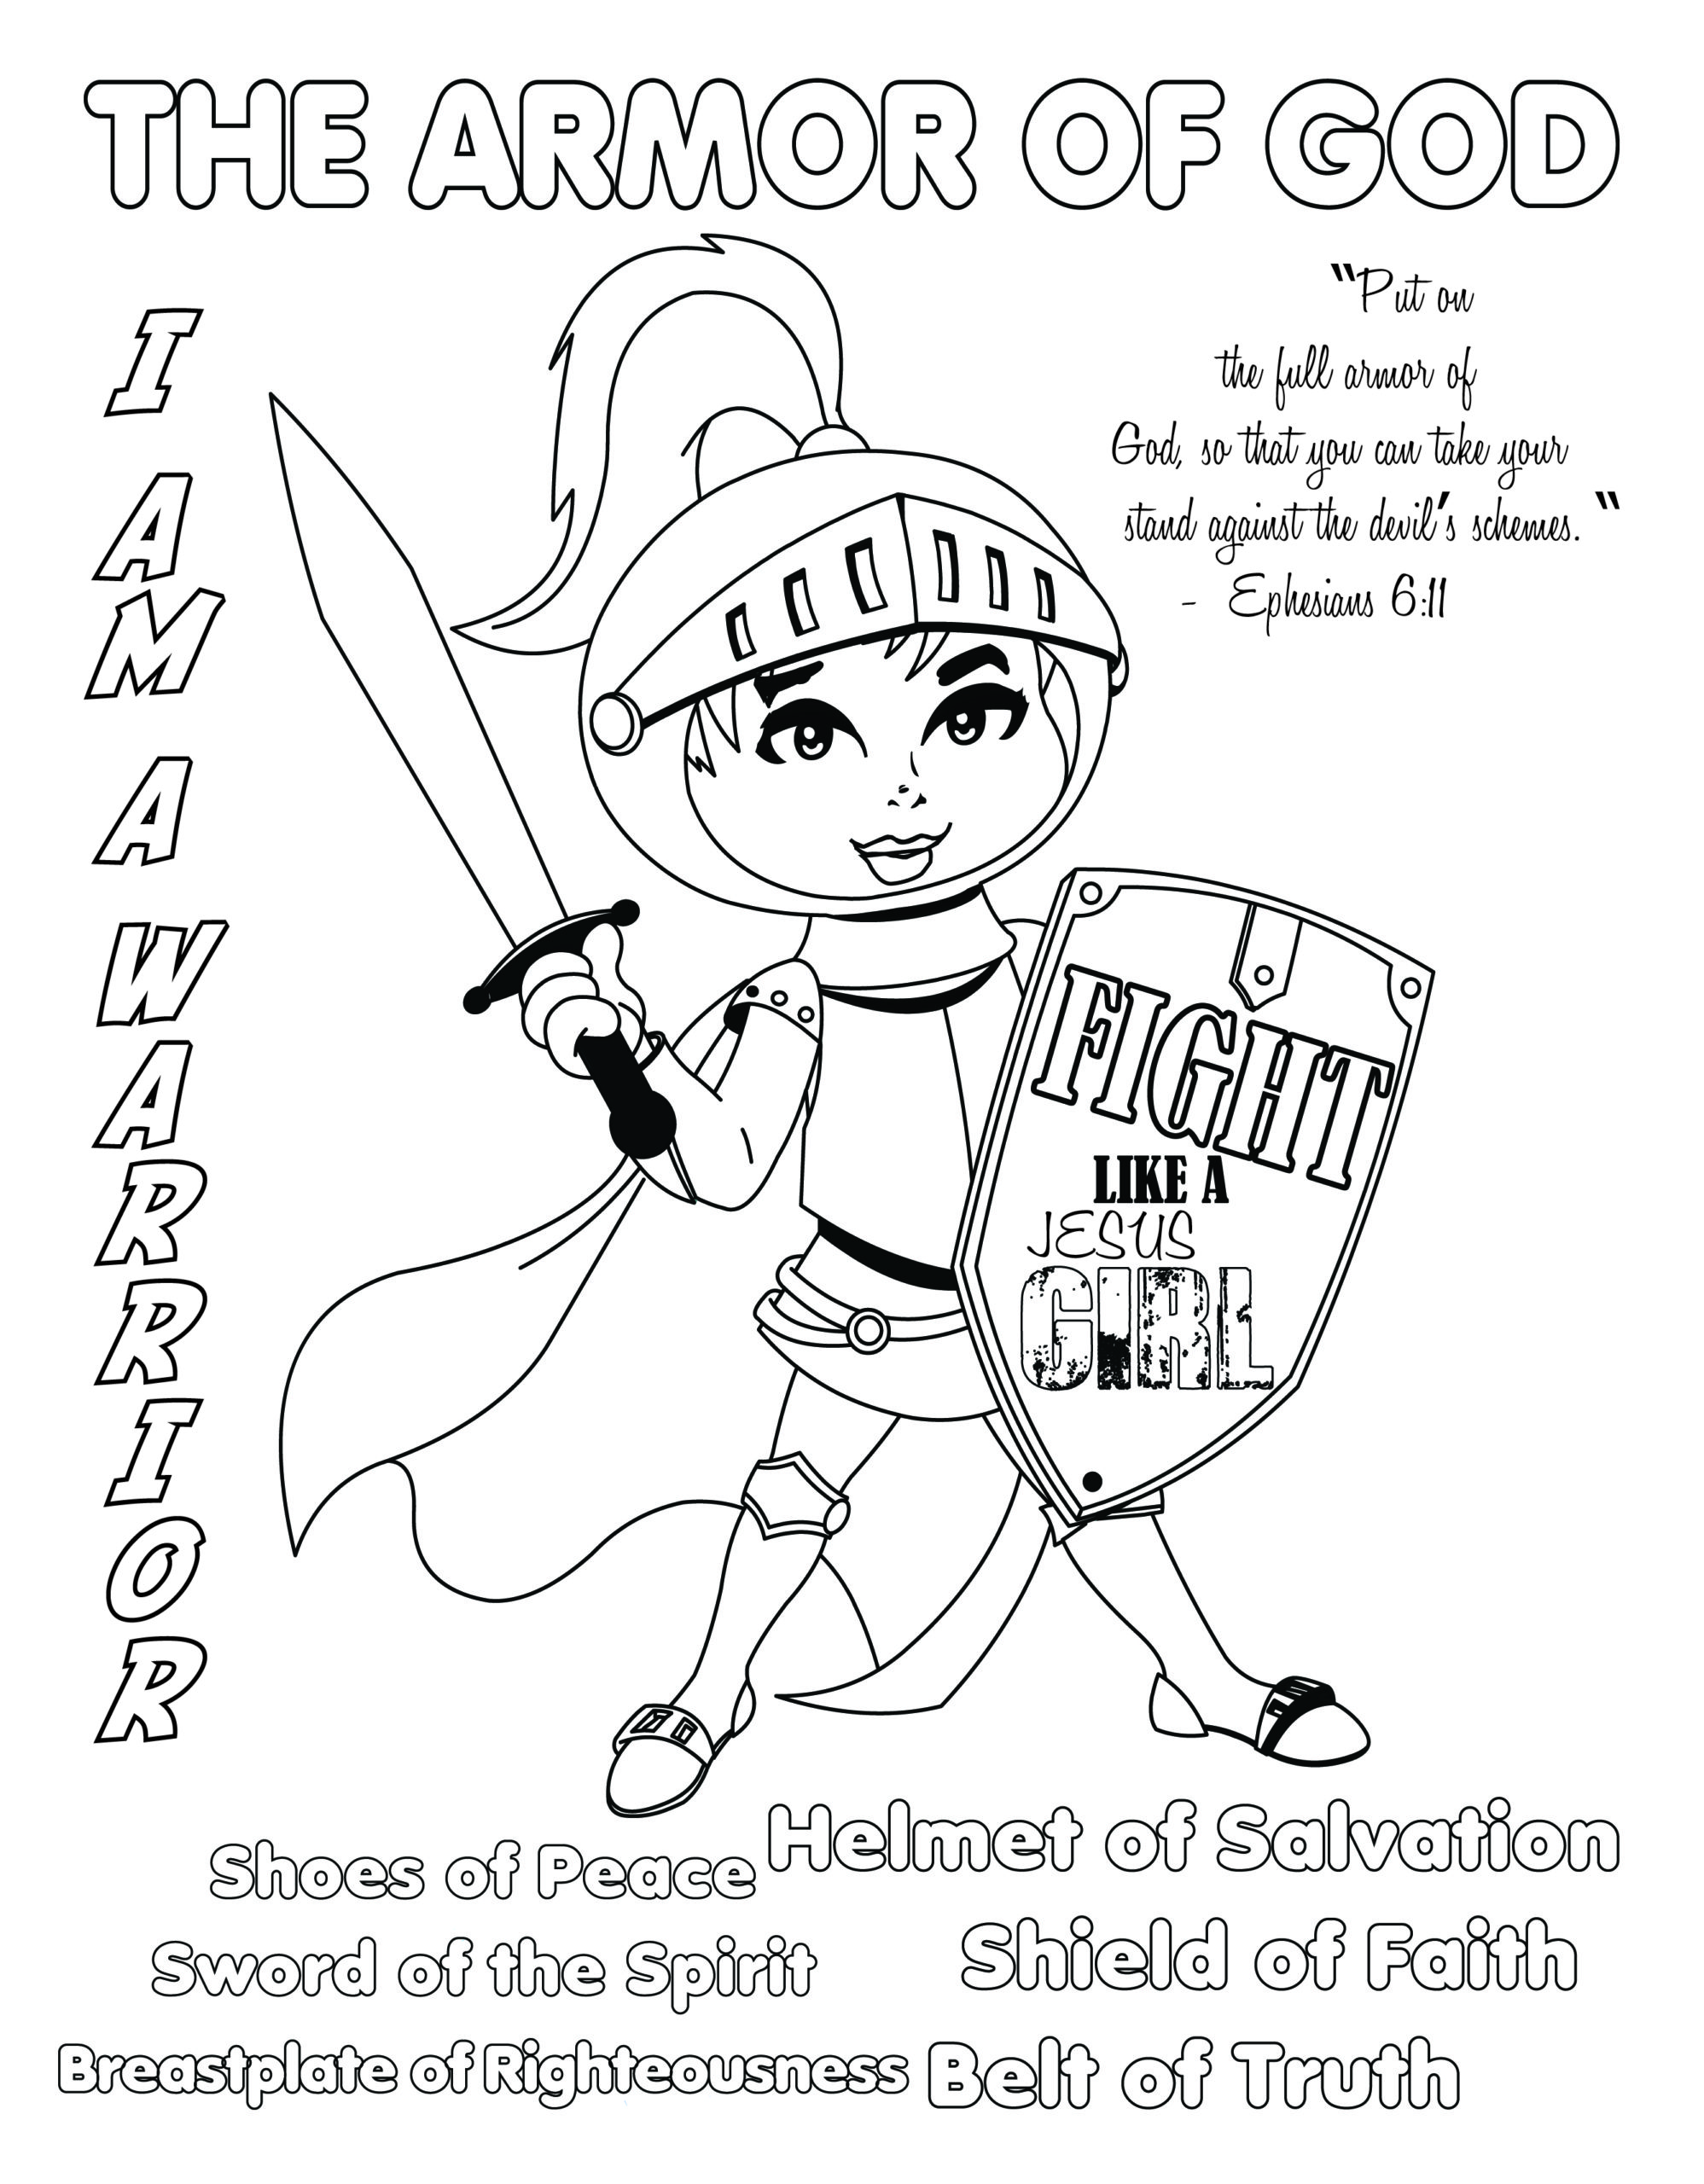 Armor of god coloring page